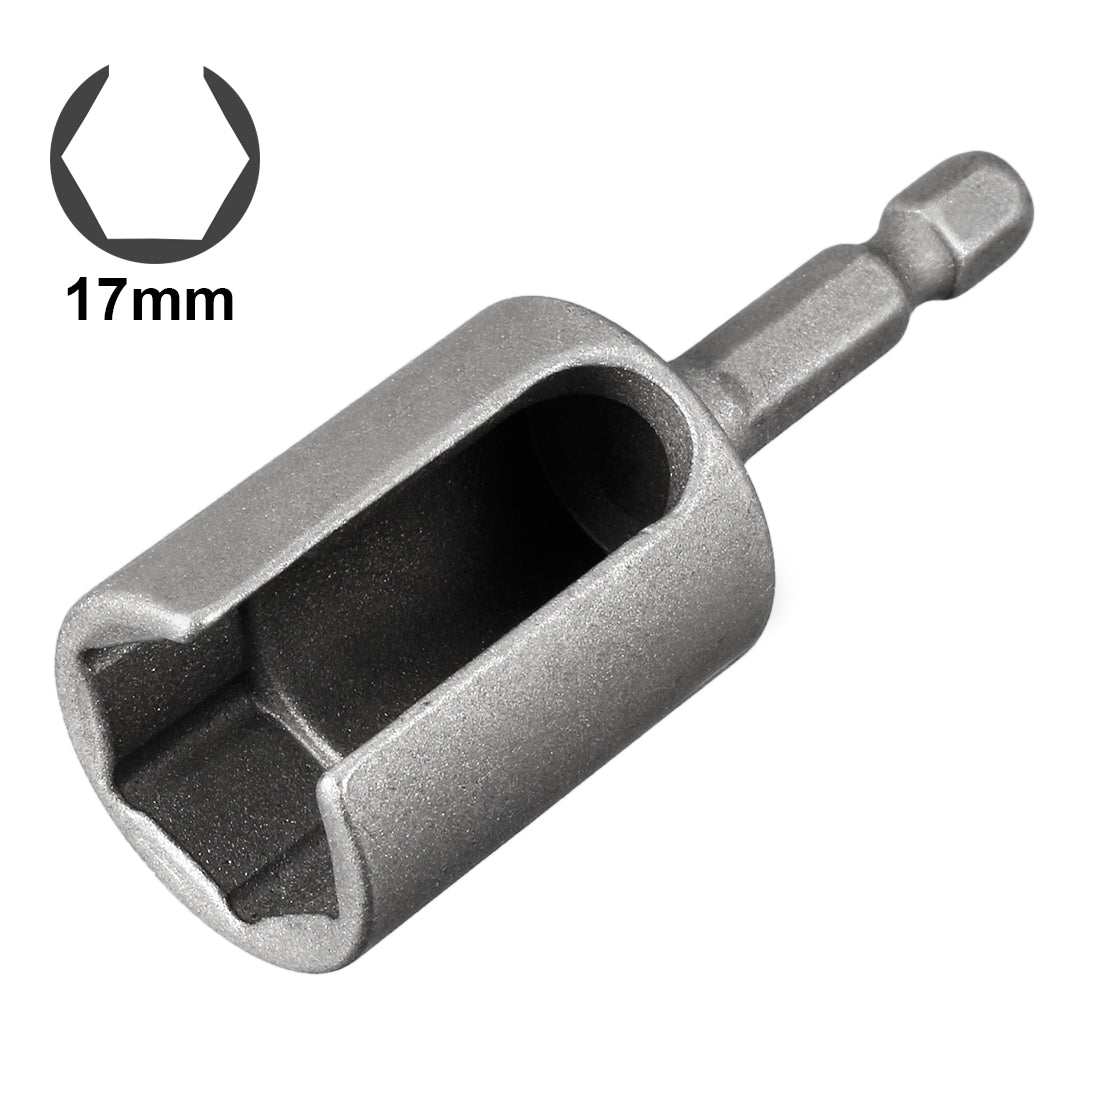 Uxcell Uxcell 1PCS 14mm CR-V Hex Nut Socket Slotted Extension Driver Bit 80mm Length